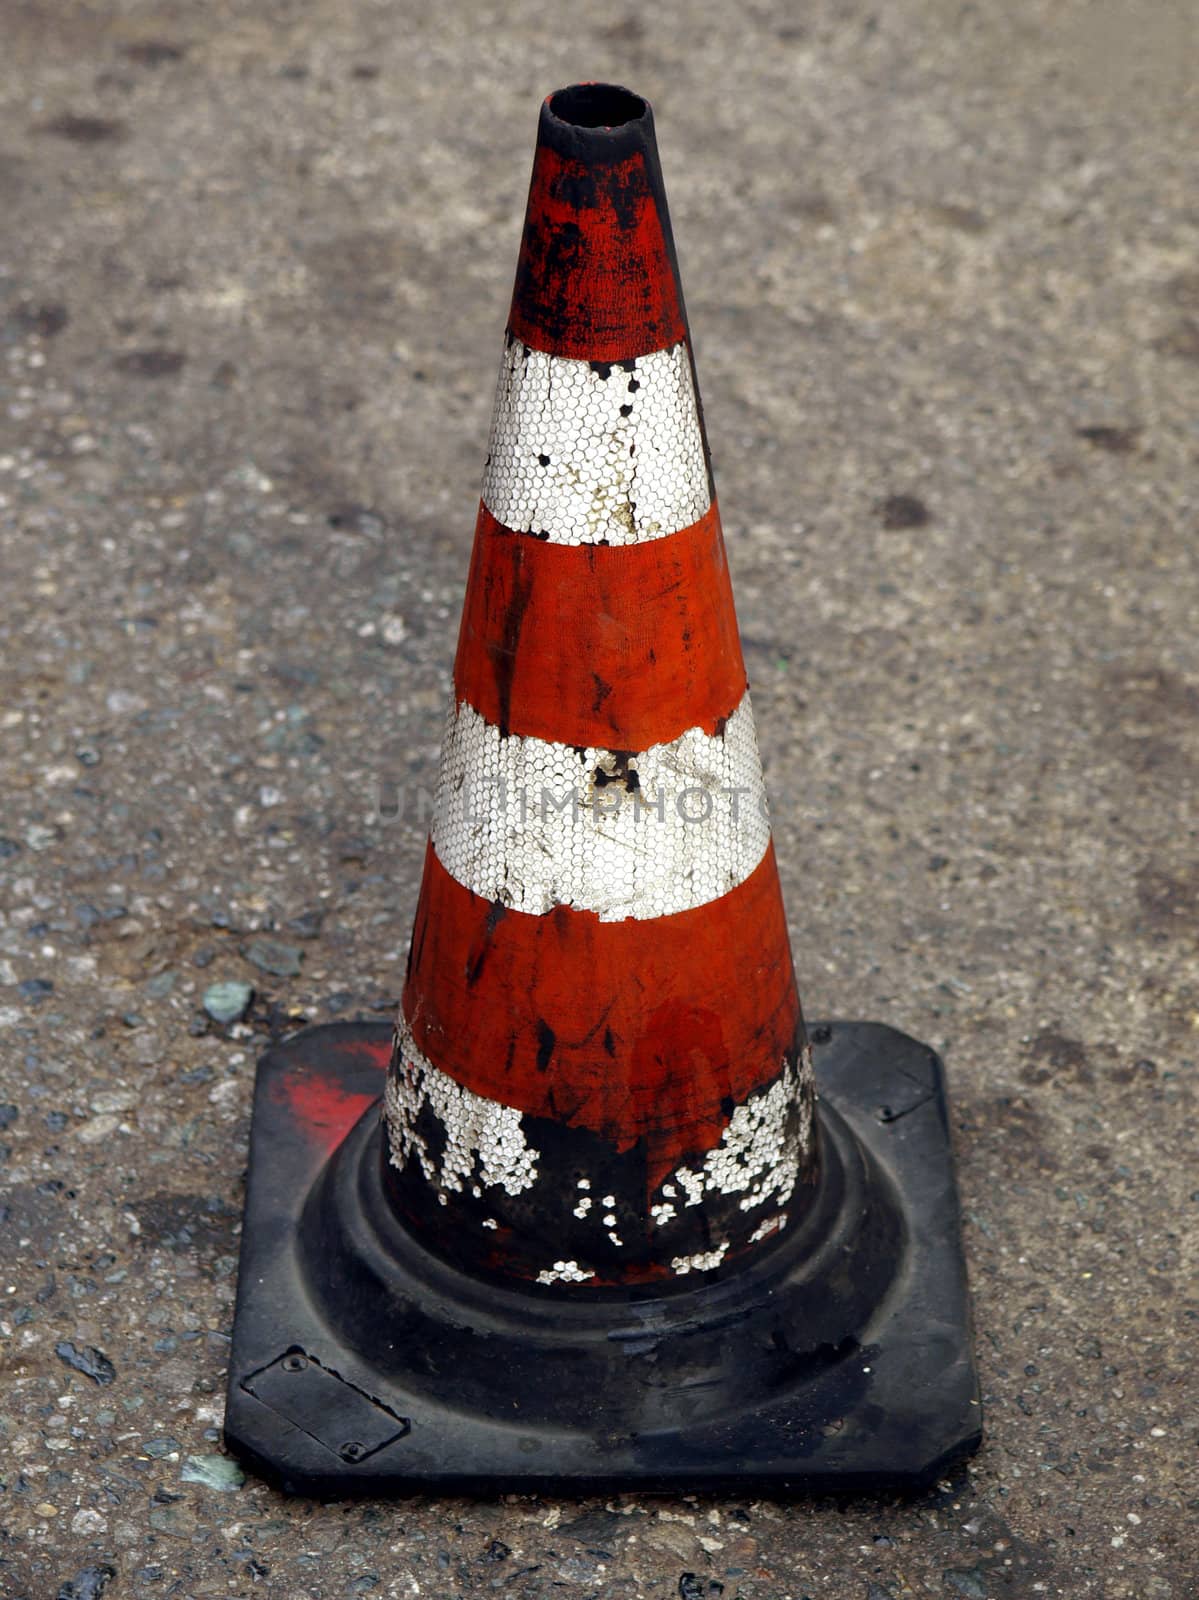 Traffic cone for road works with red and white stripes